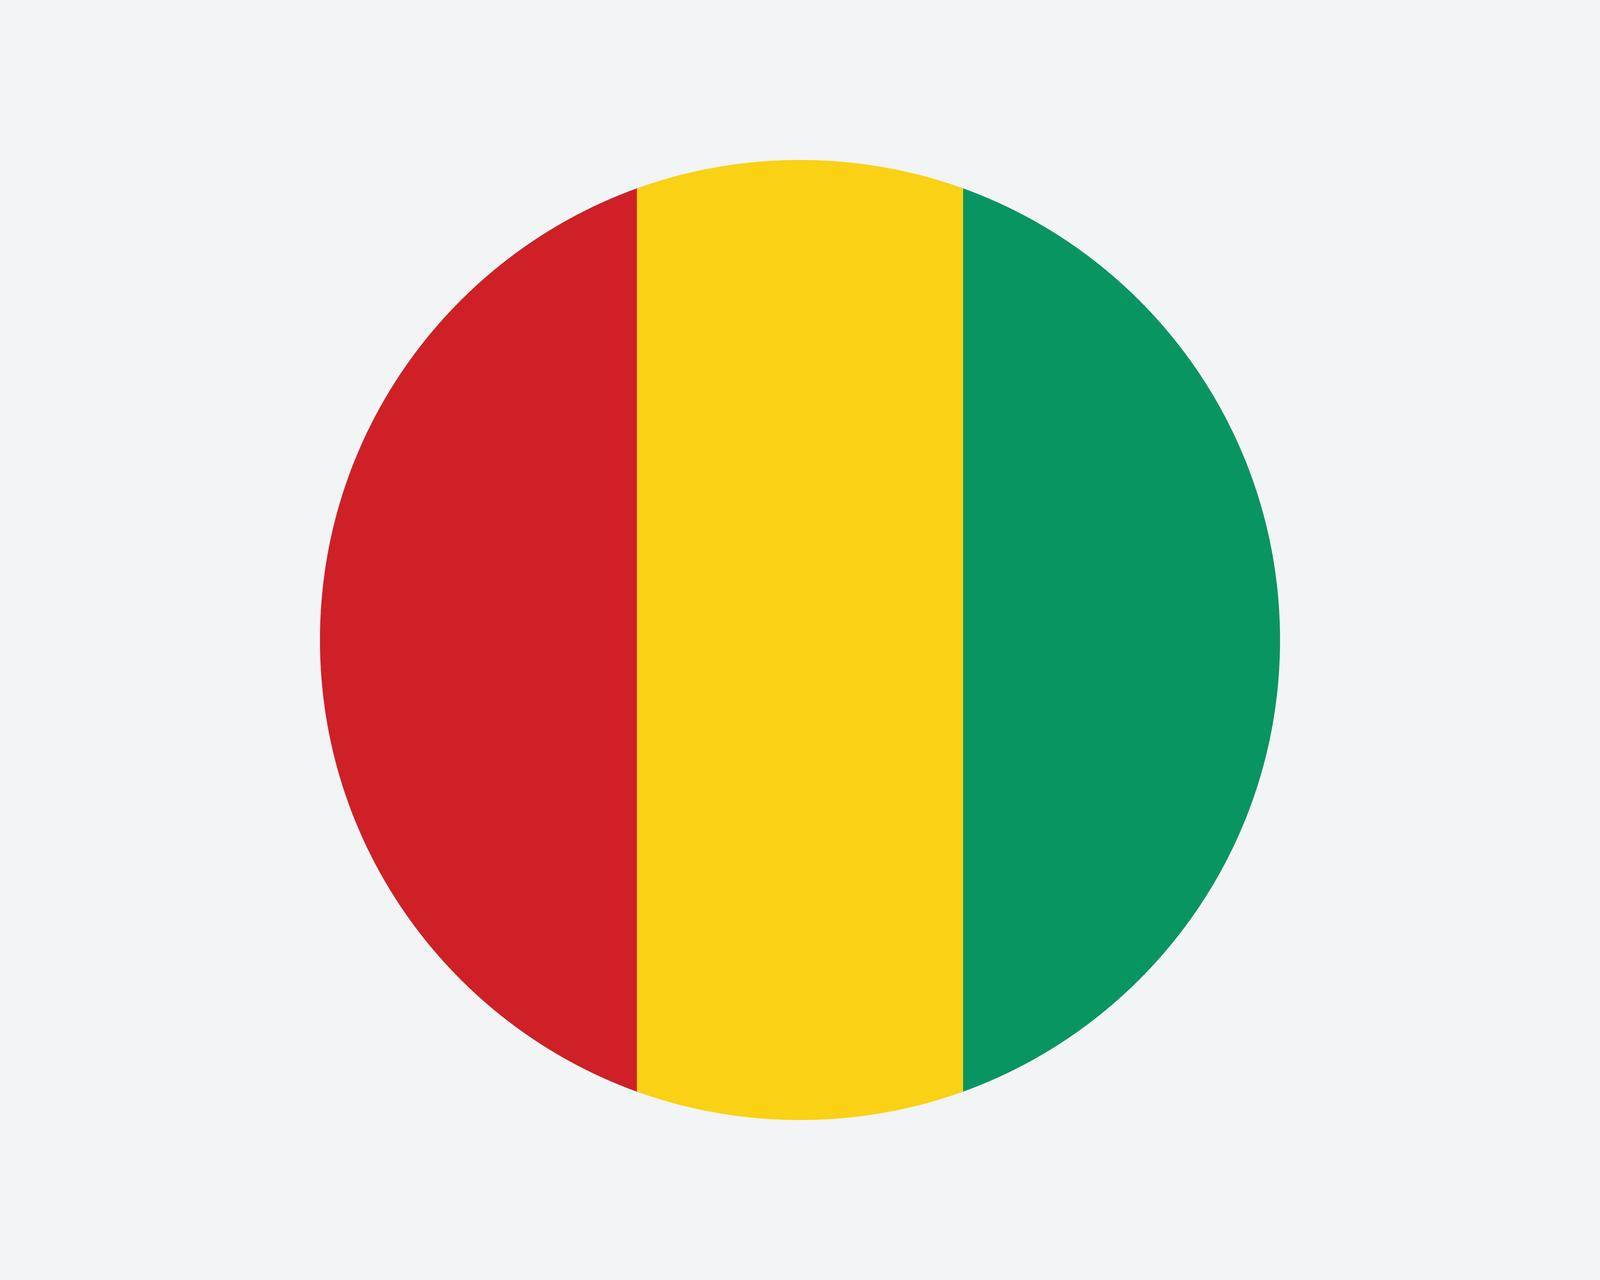 Guinea Round Country Flag. Guinean Circle National Flag. Republic of Guinea Circular Shape Button Banner. EPS Vector Illustration.